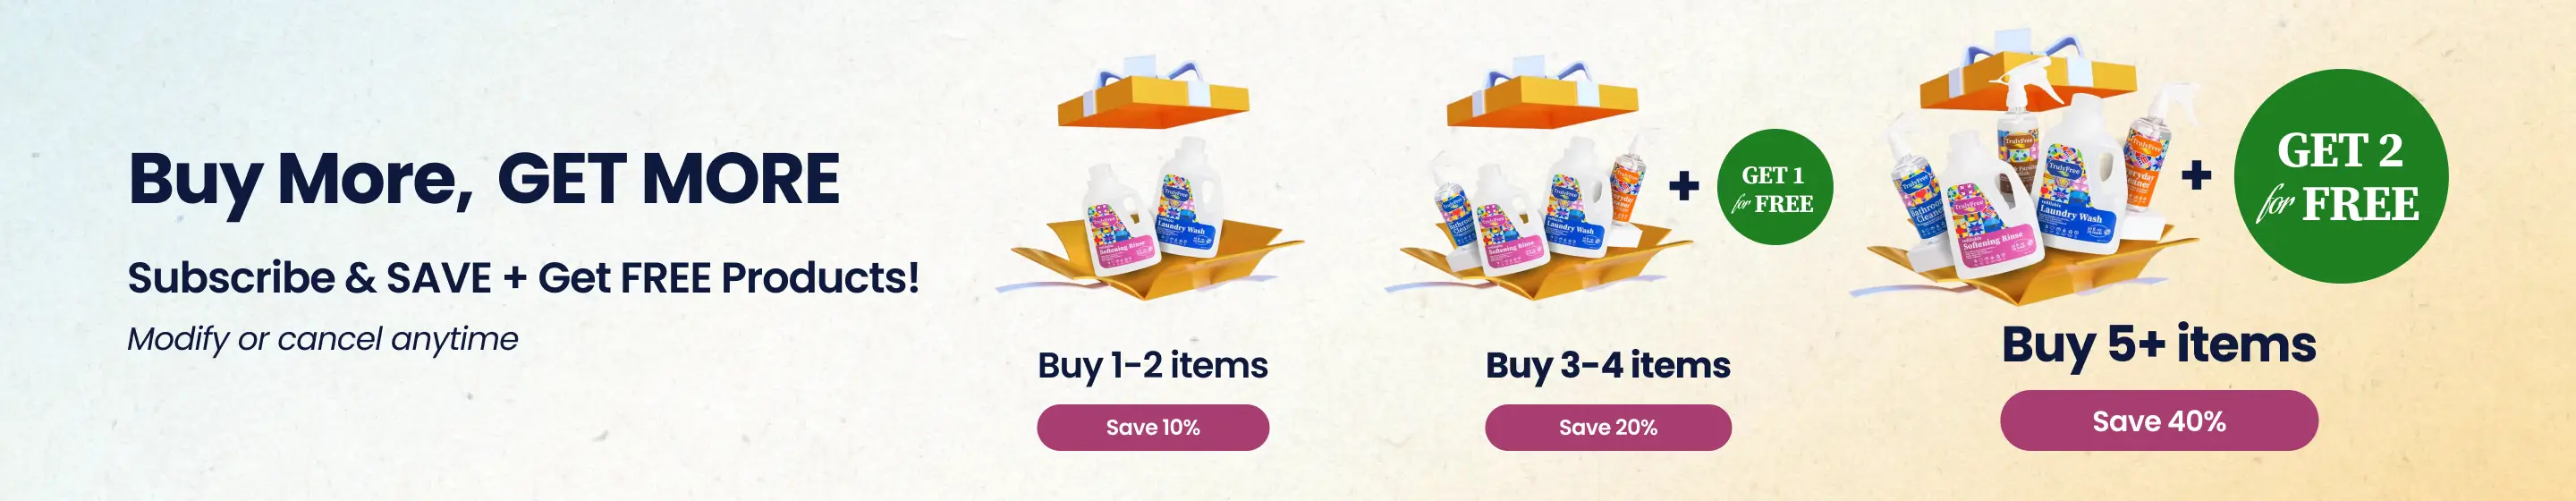 Truly Free Build Your Box. Add items, get free items +40% off